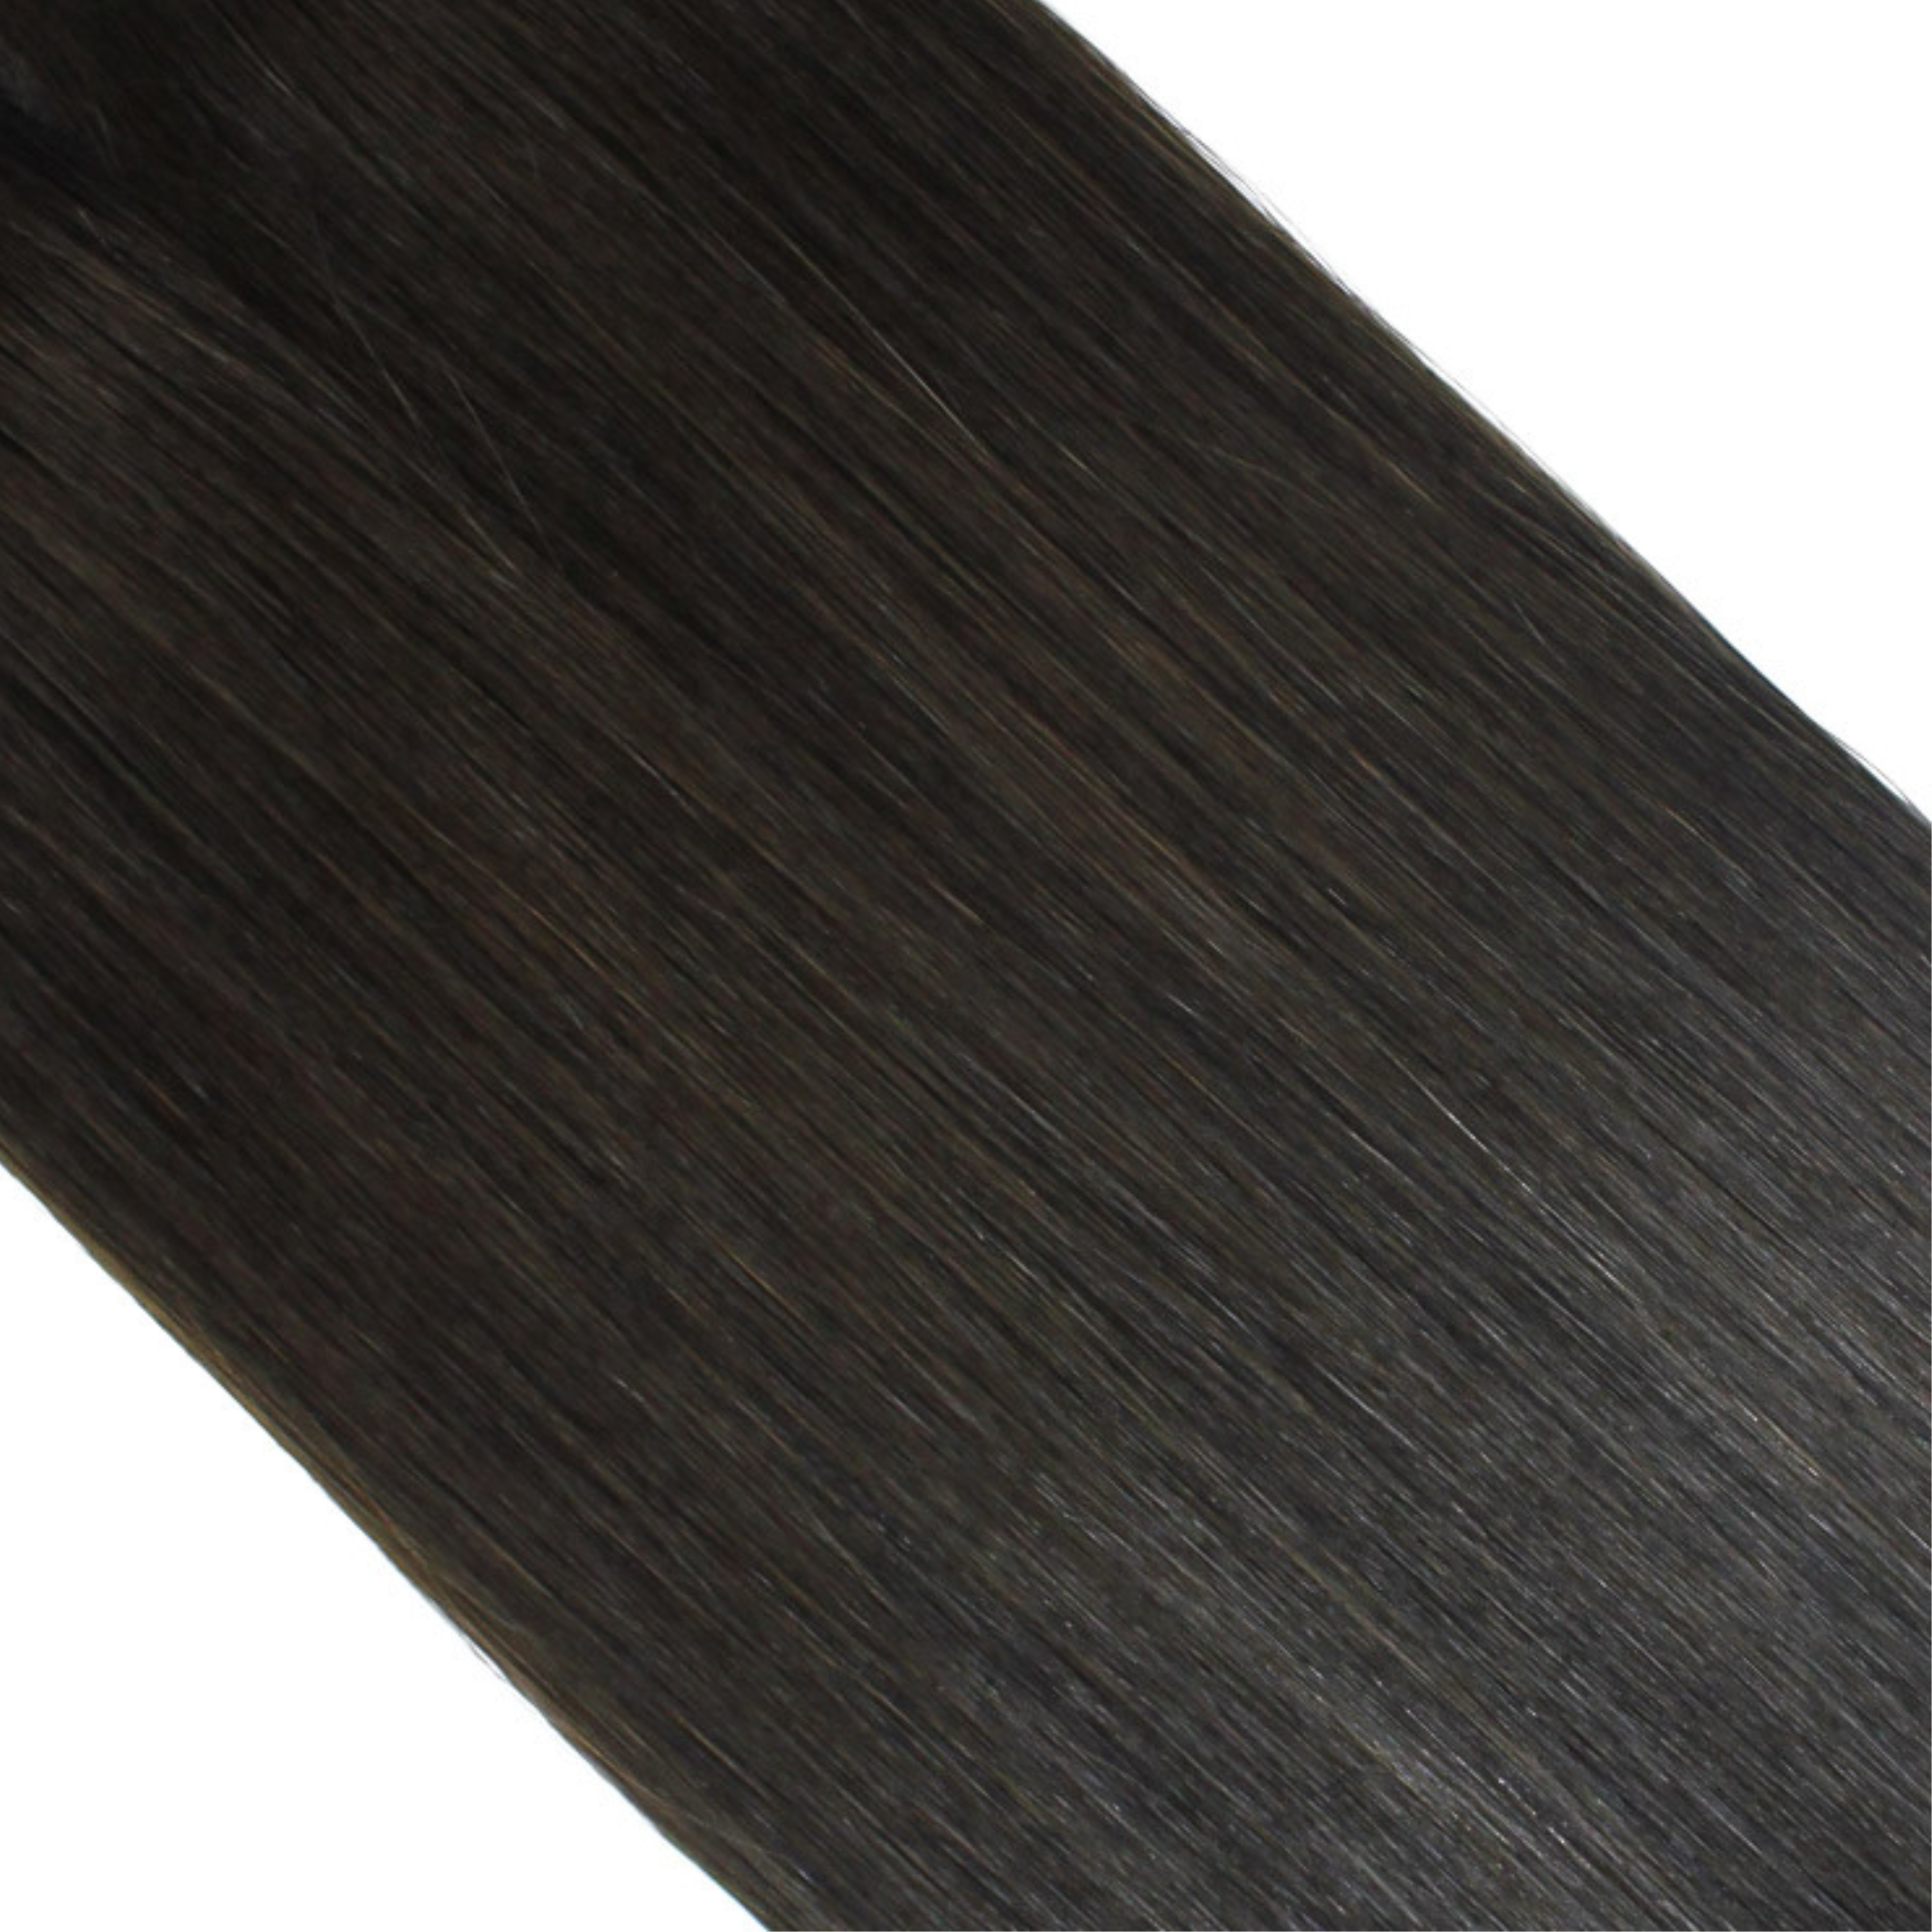 "hair rehab london 22" tape hair extensions shade swatch titled show stopper"